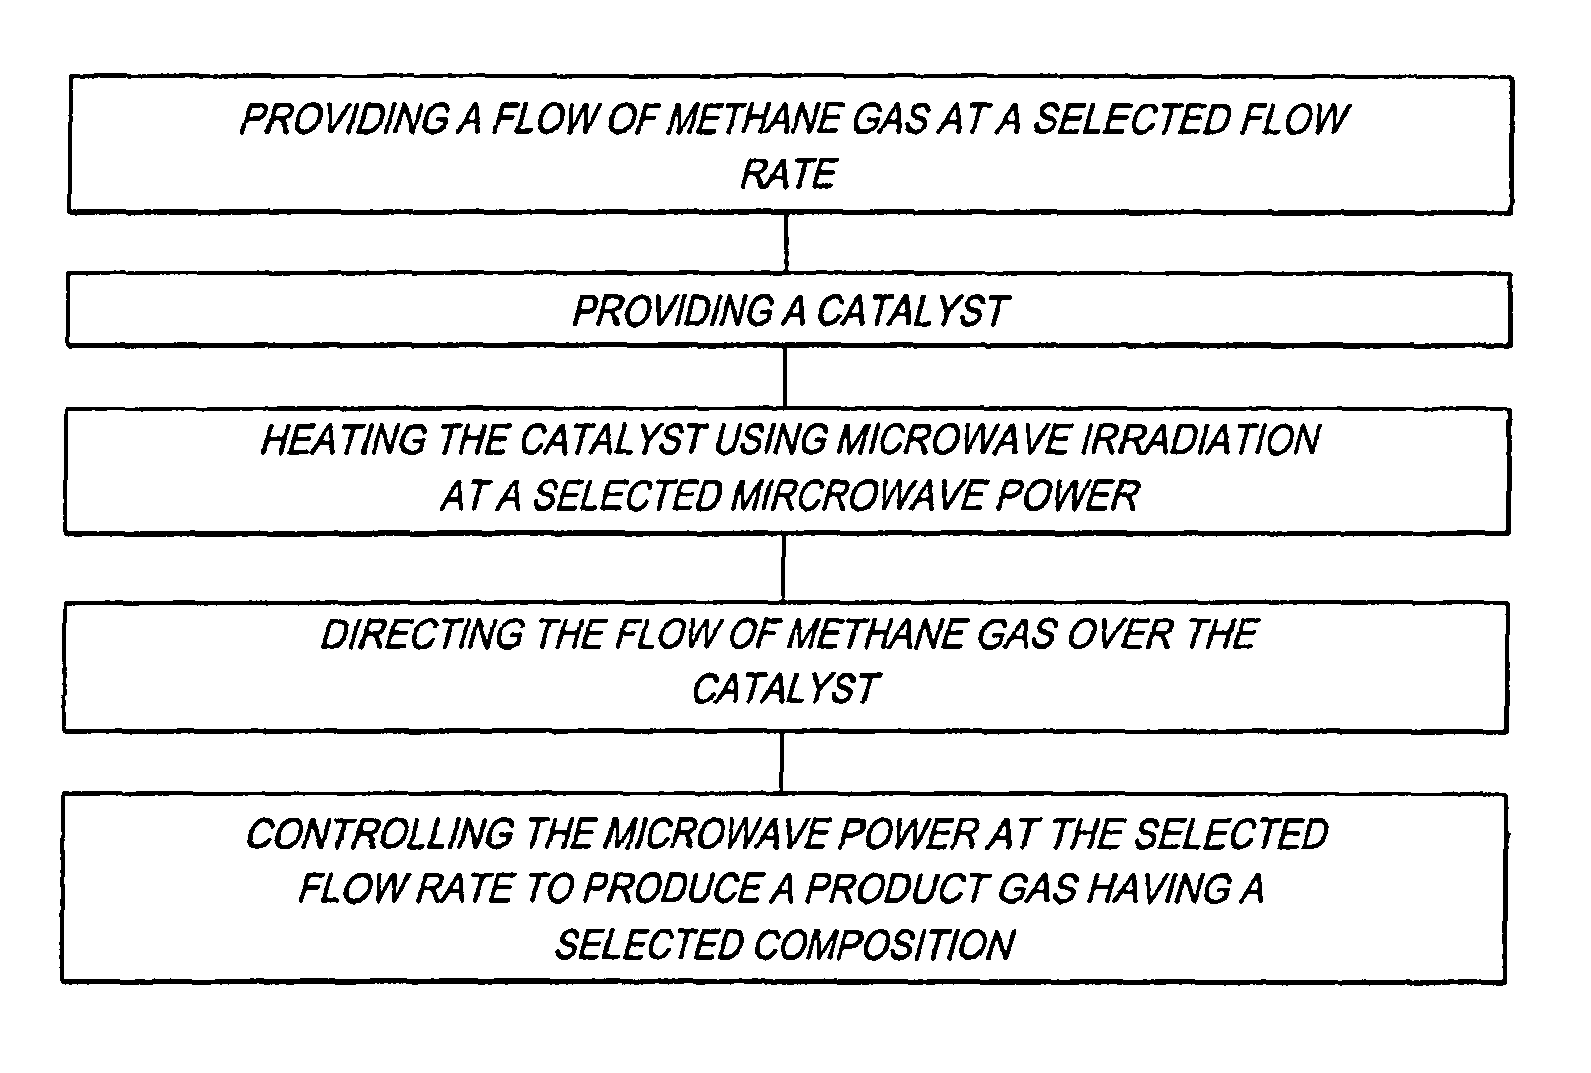 Method for producing a hydrogen enriched fuel and carbon nanotubes using microwave assisted methane decomposition on catalyst